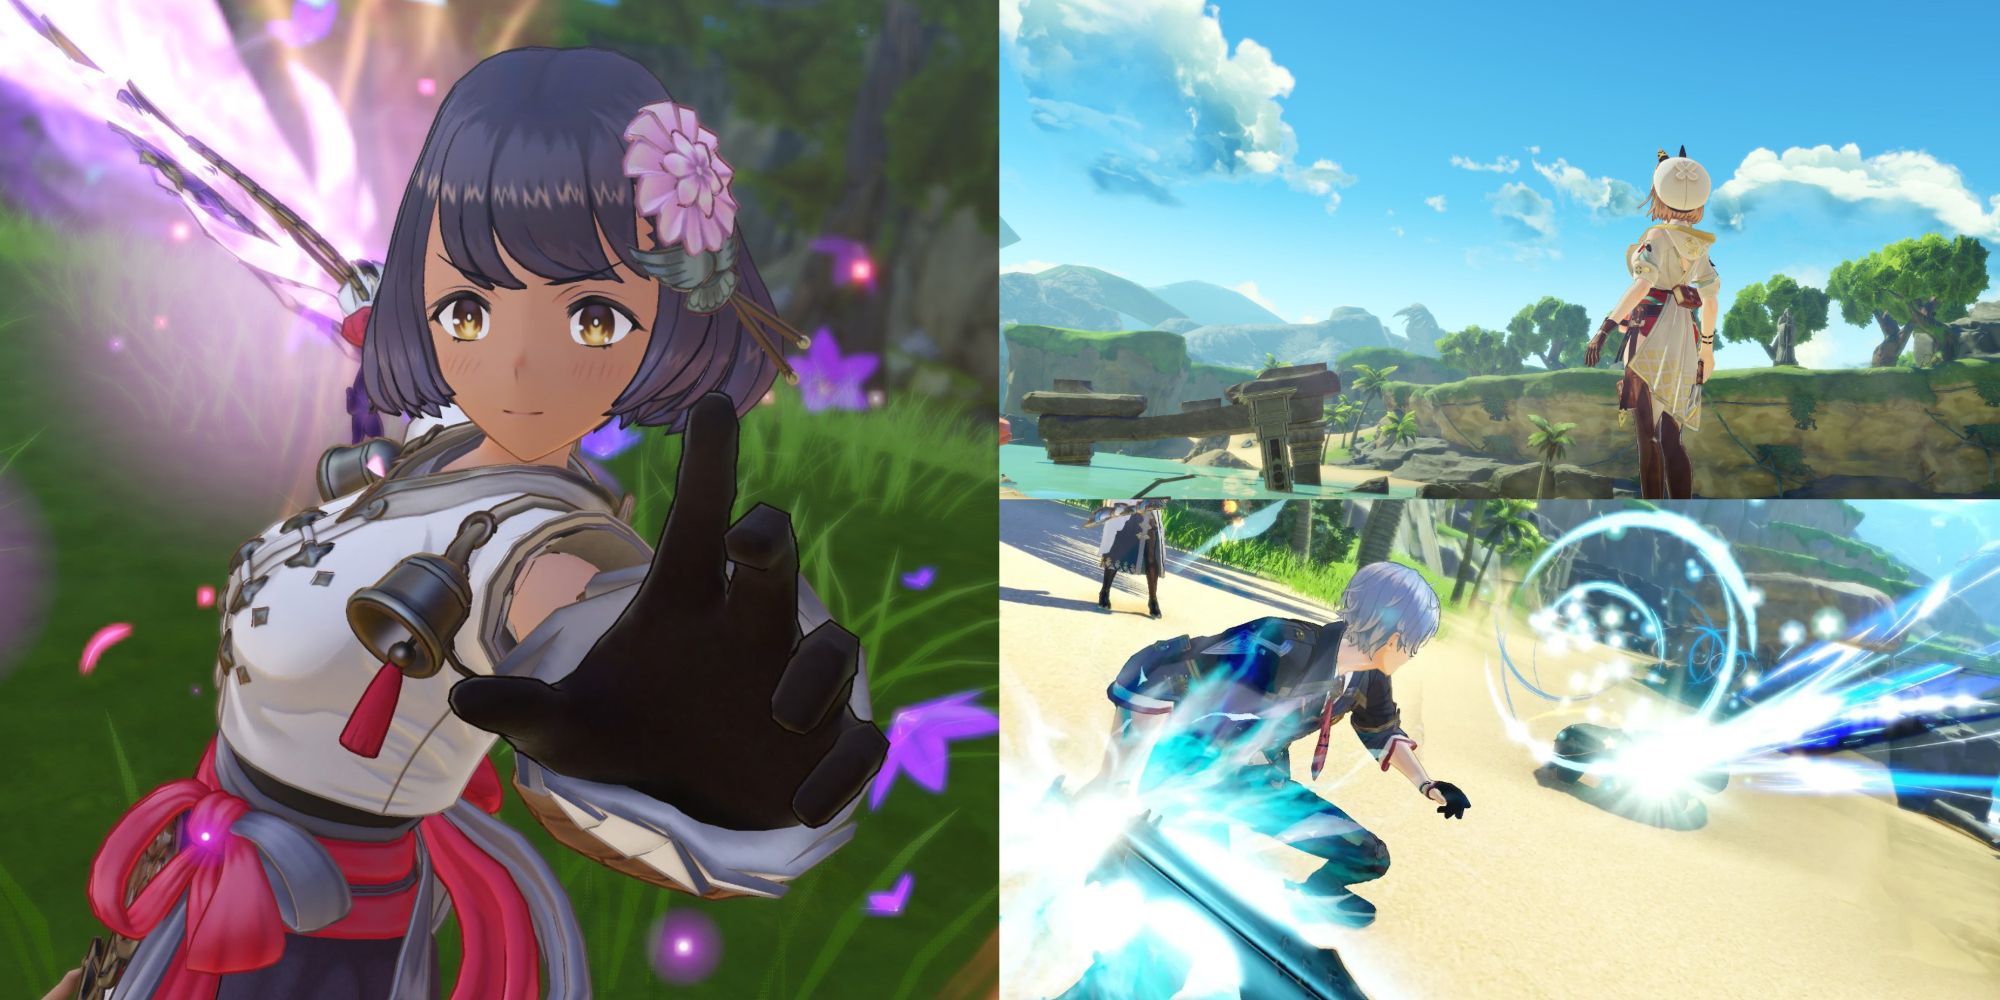 A collage of images from Atelier Ryza 3: Alchemist Of The End & The Secret Key. The leftmost one is of Federica posing after defeating an enemy. The top right image showcases Ryza staring out into the open world. And the bottom right is of Bos performing a special attack on a monster.